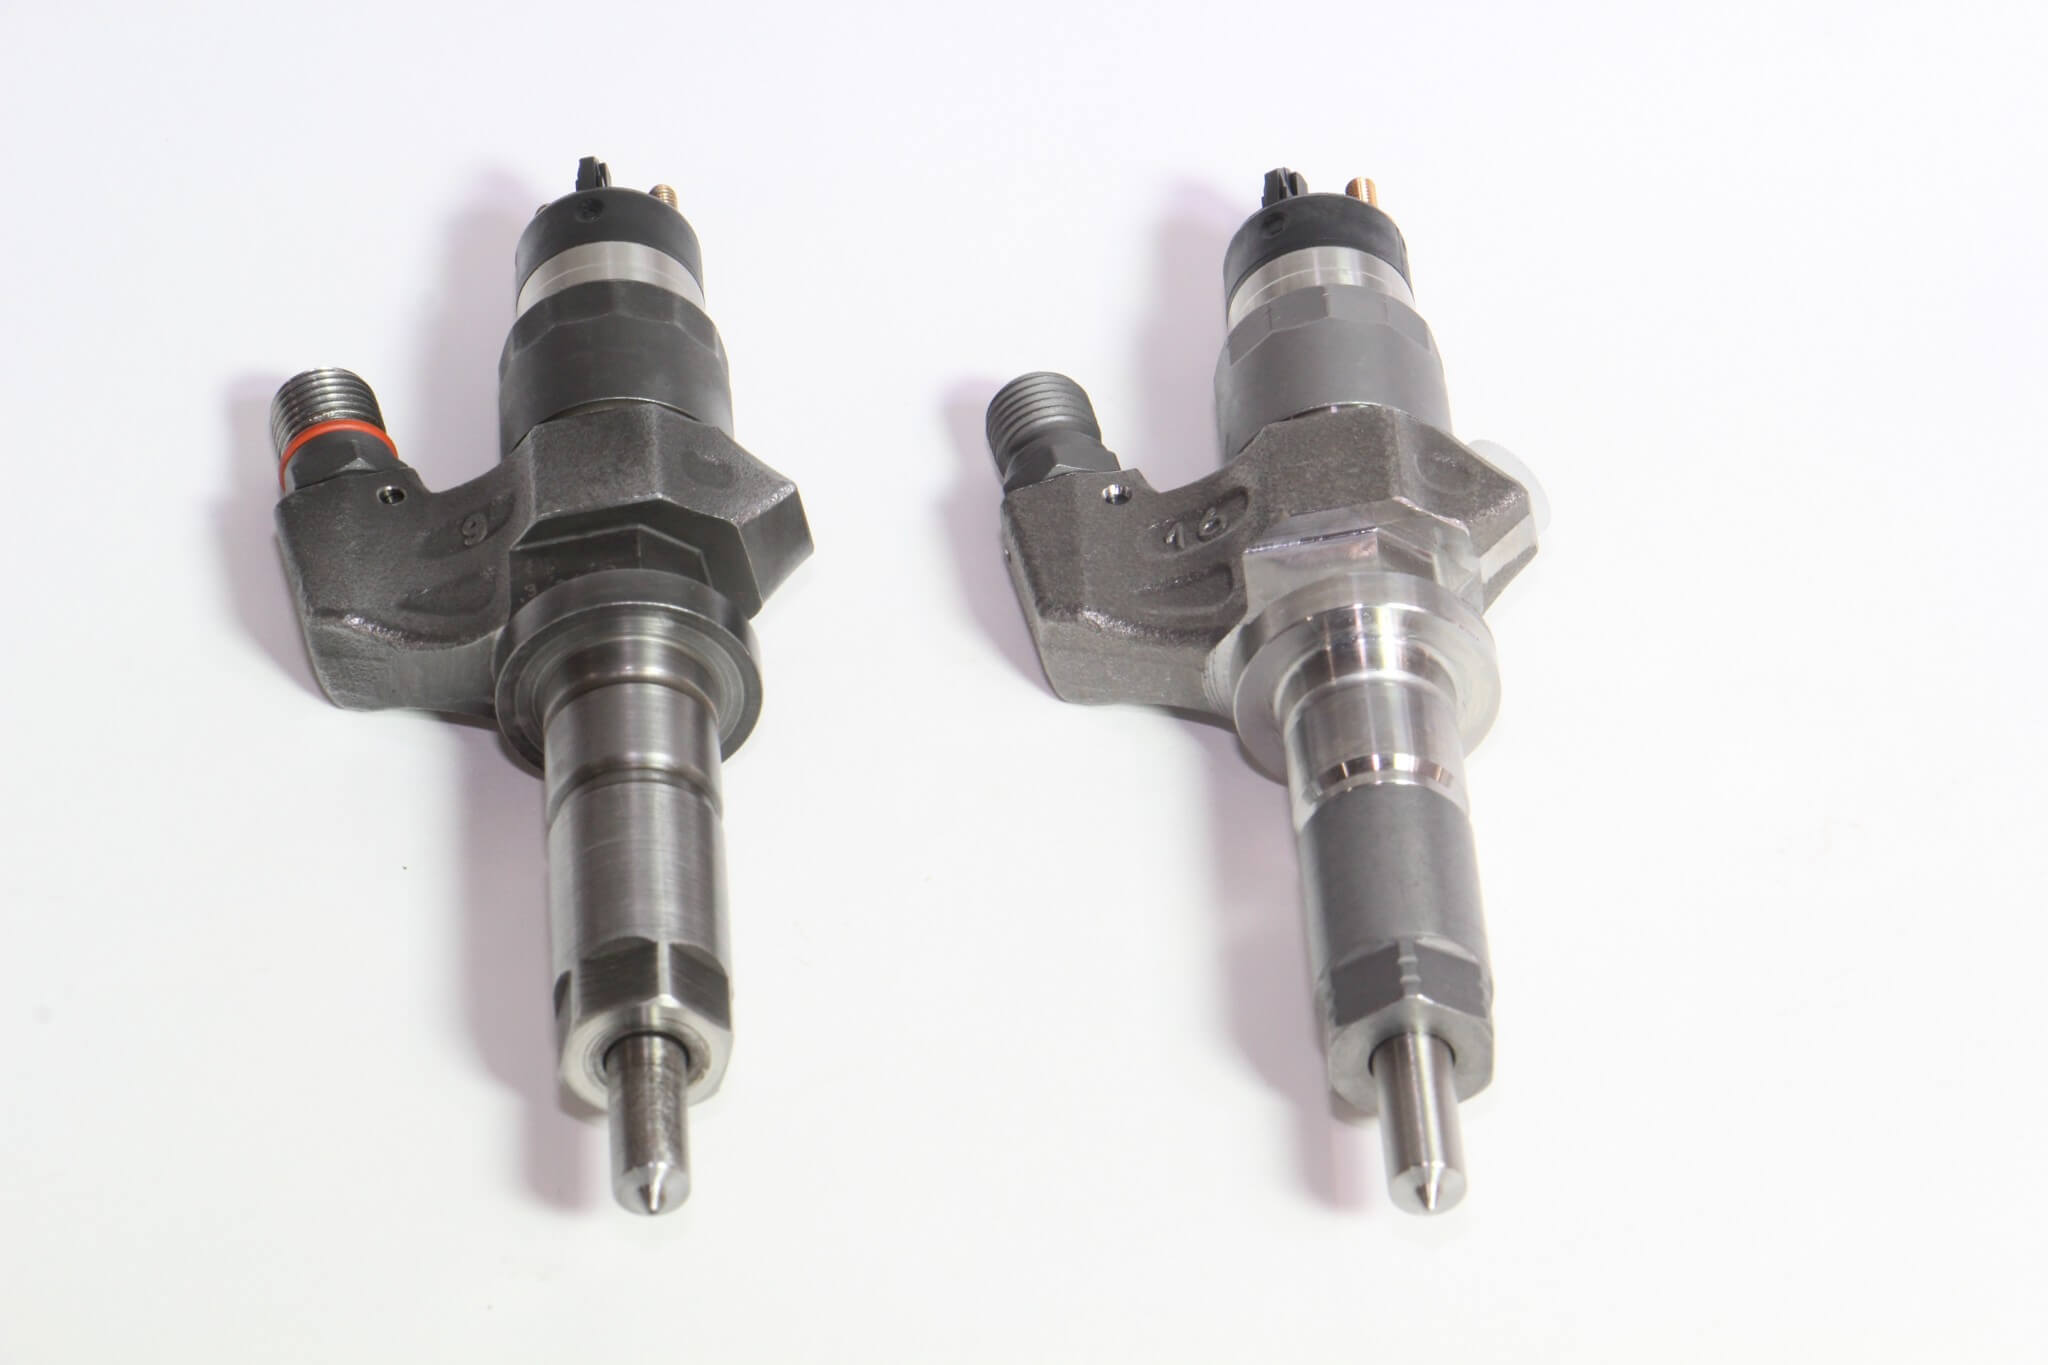 12. This image shows the old injector (left) and new Bosch injector (right). Quality is not always visible at first glance, but it’s seen in engine performance right away. Don’t skimp here; all replacement injectors are not the same, as this owner found out the first time around.